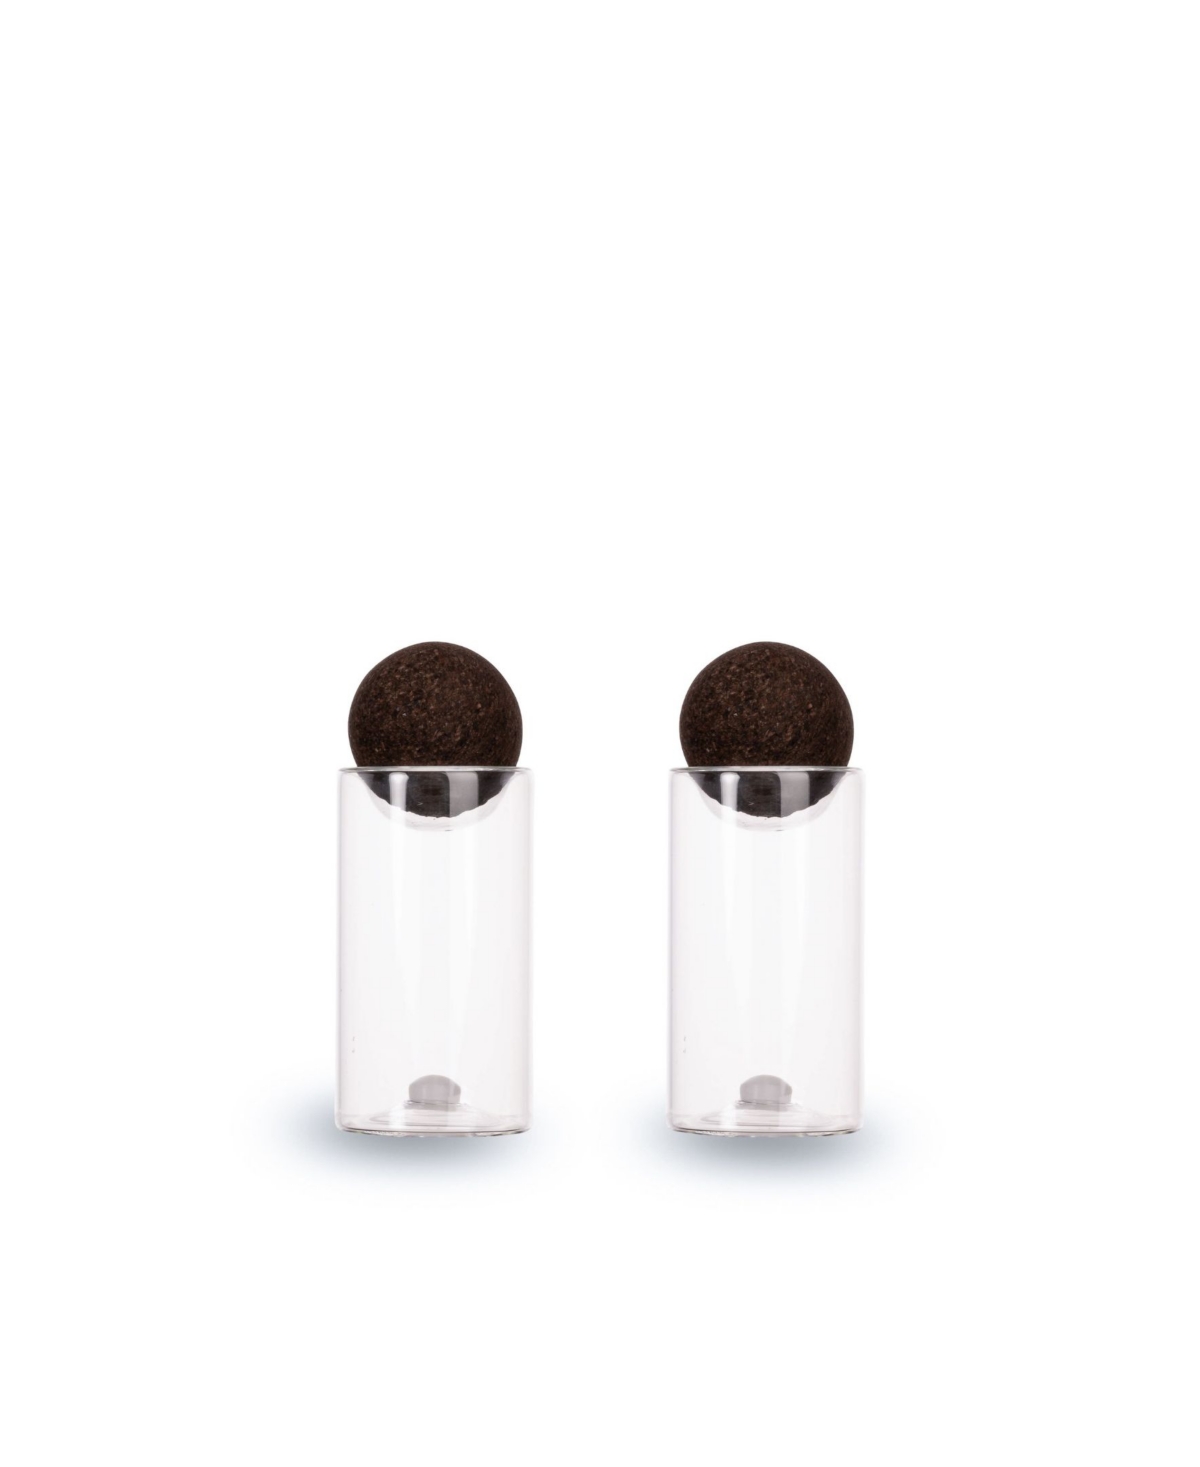 Sagaform Nature Salt And Pepper Shakers With Cork Stoppers, Set Of 2 In White